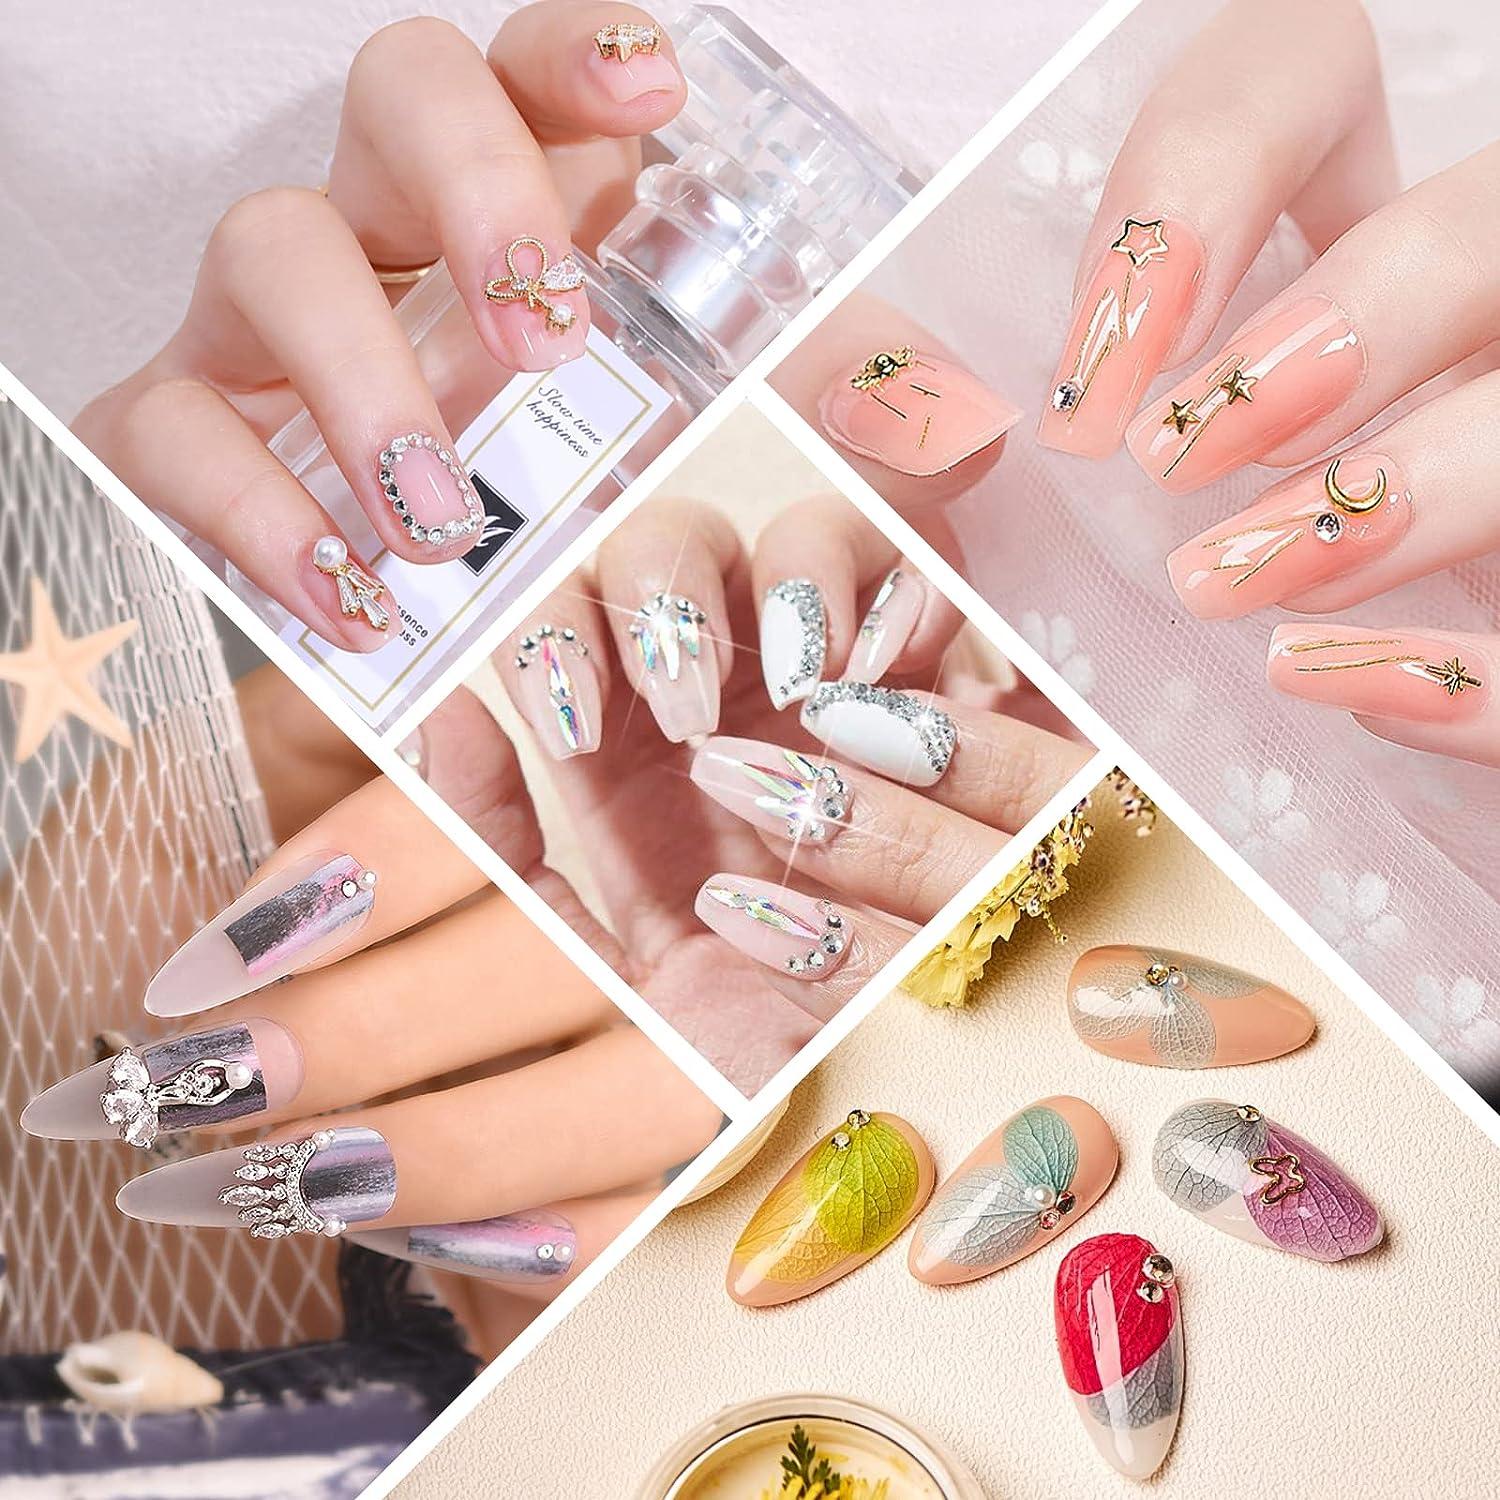 Nail Rhinestone Glue for Nails Art Glue for Rhinestones Gel Adhesive No  Wipe for Gem Stones Jewelry Charms with Nail Accessories (8ml+10ml)